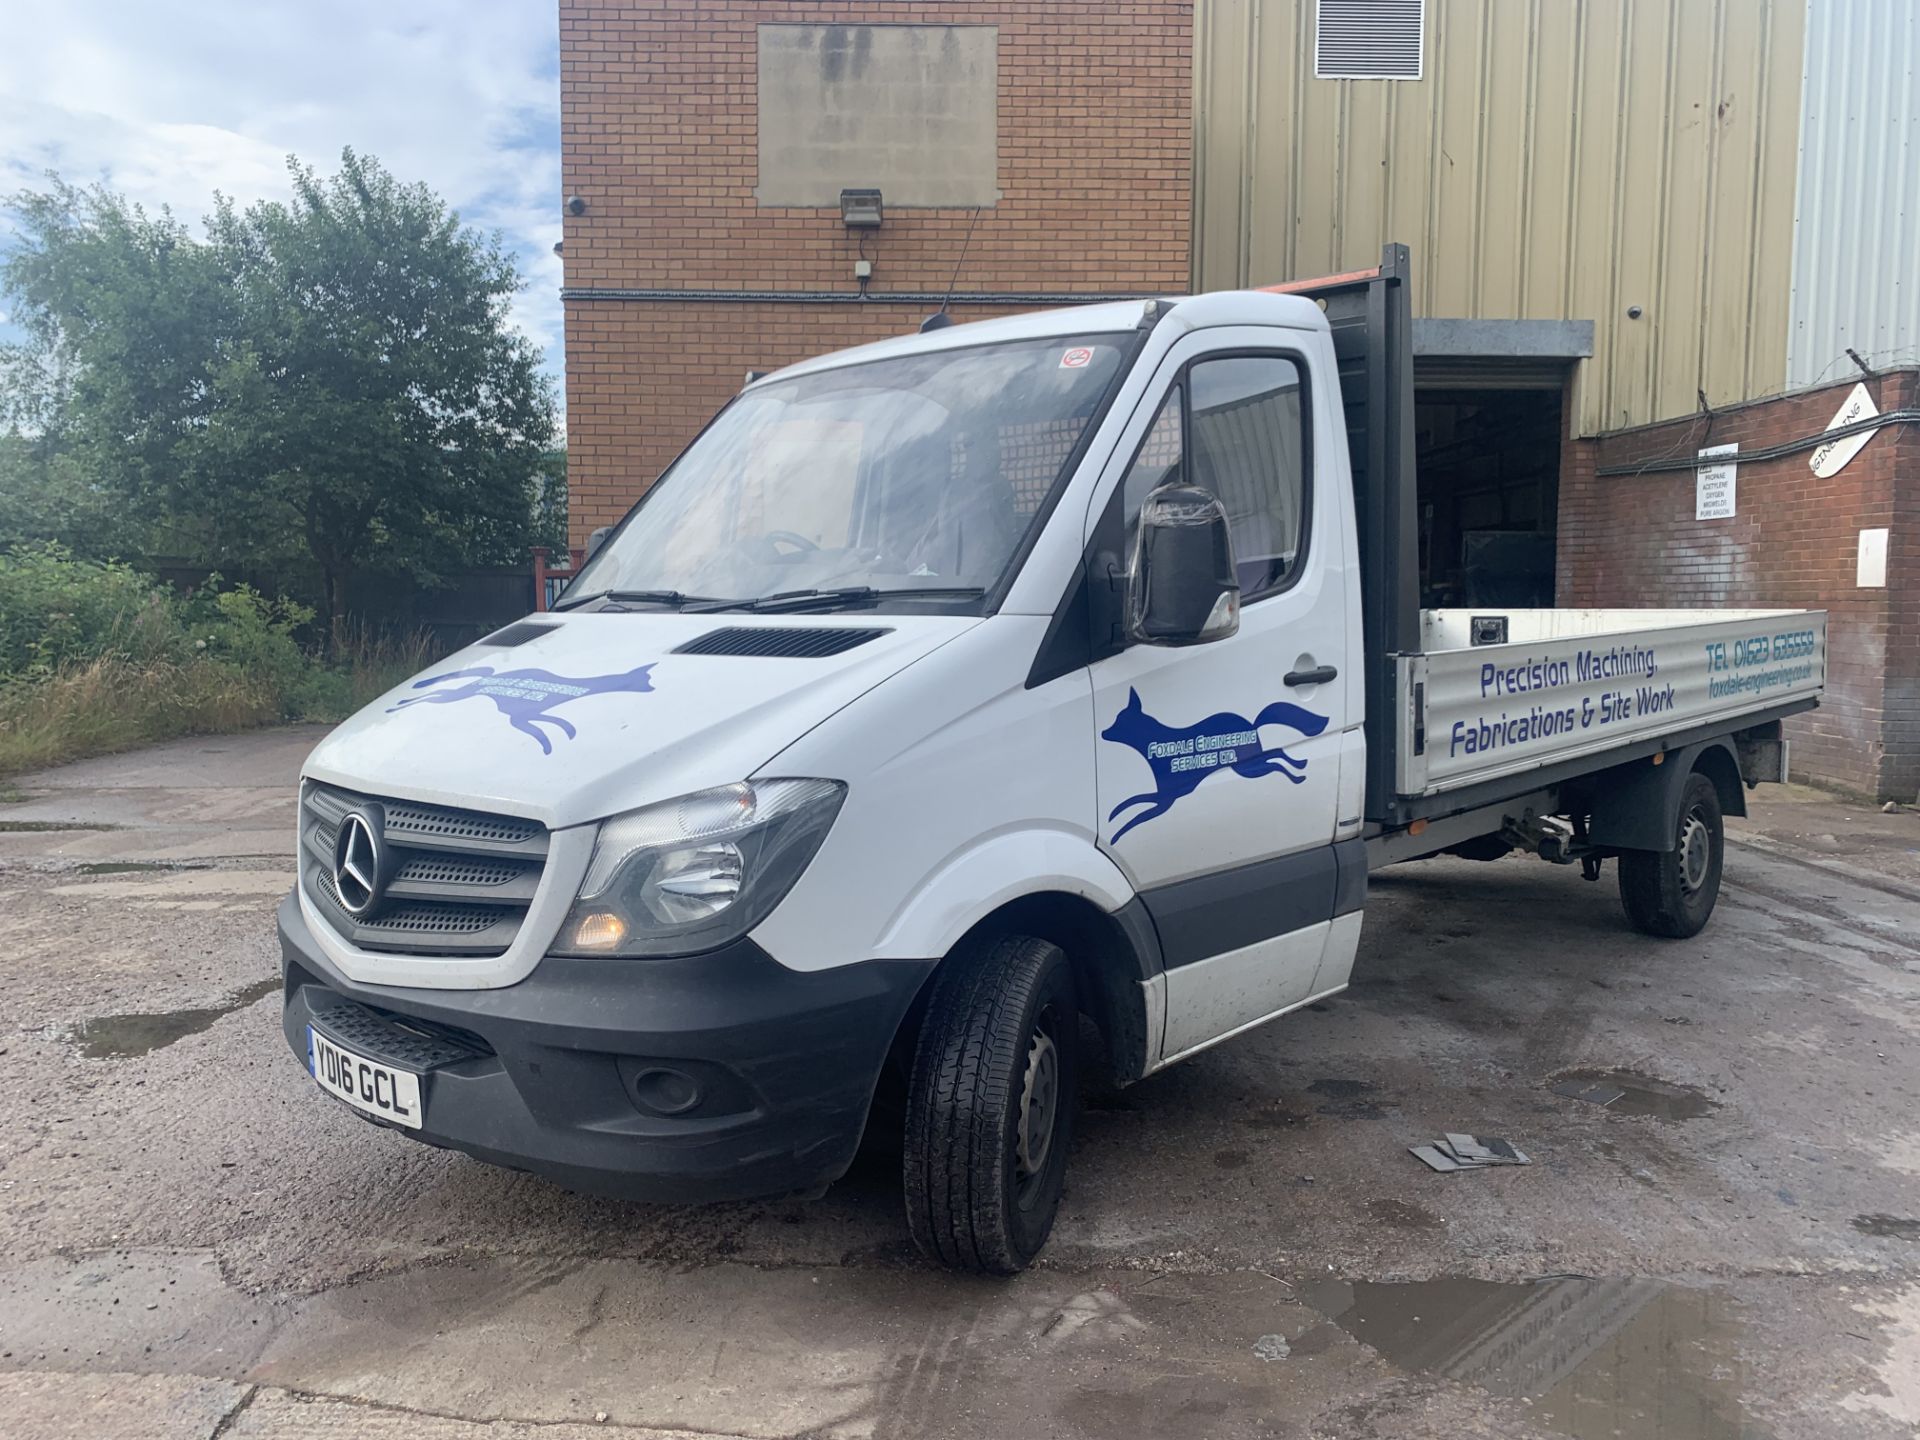 Mercedes-Benz Sprinter 314 CDI Diesel Dropside/Flatbed Lorry | YD16 GCL | 171,907 Miles - Image 2 of 12